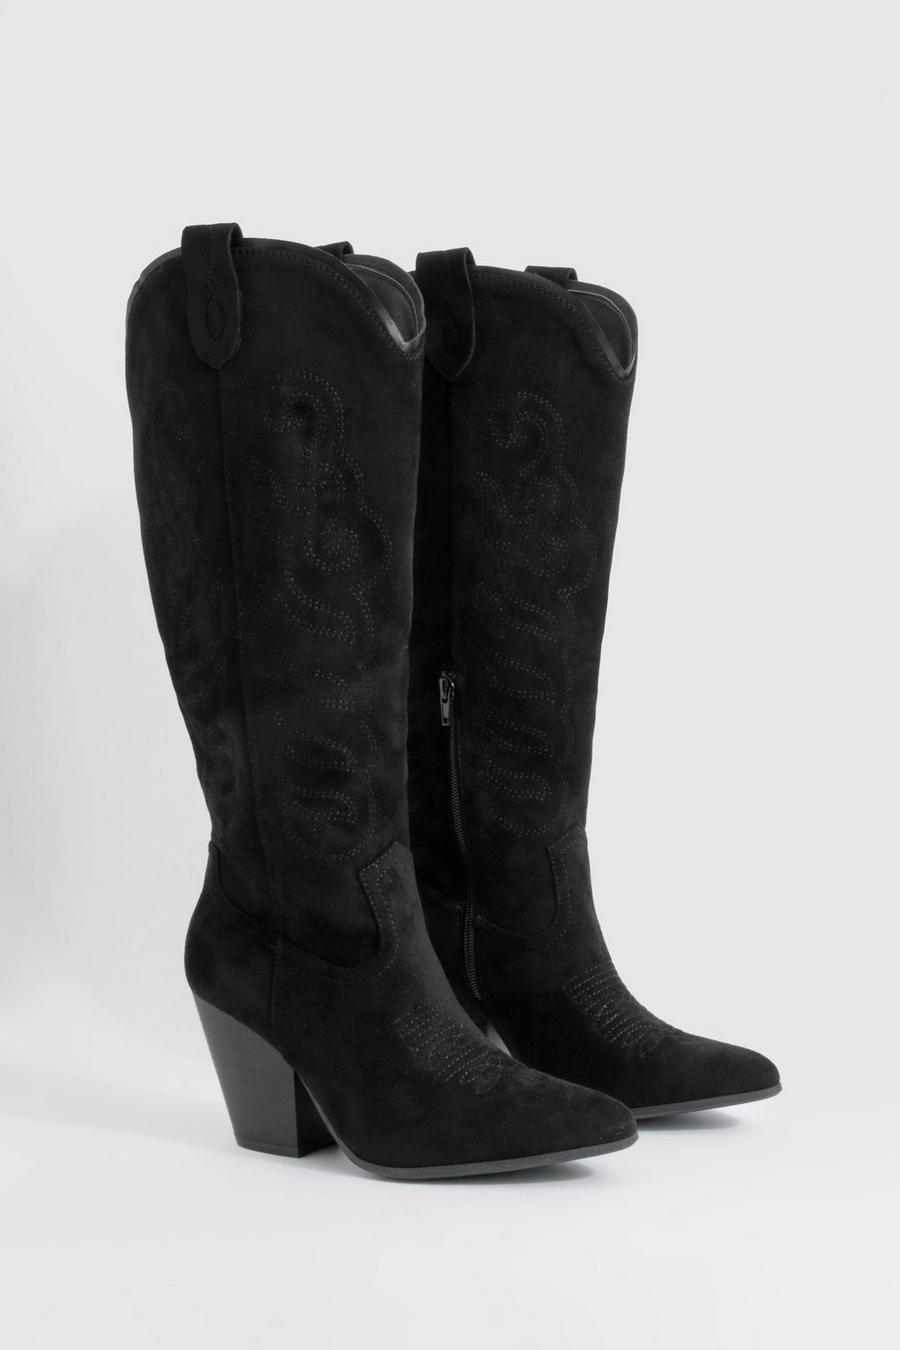 Black Embroidered Knee High Western Cowboy Boots